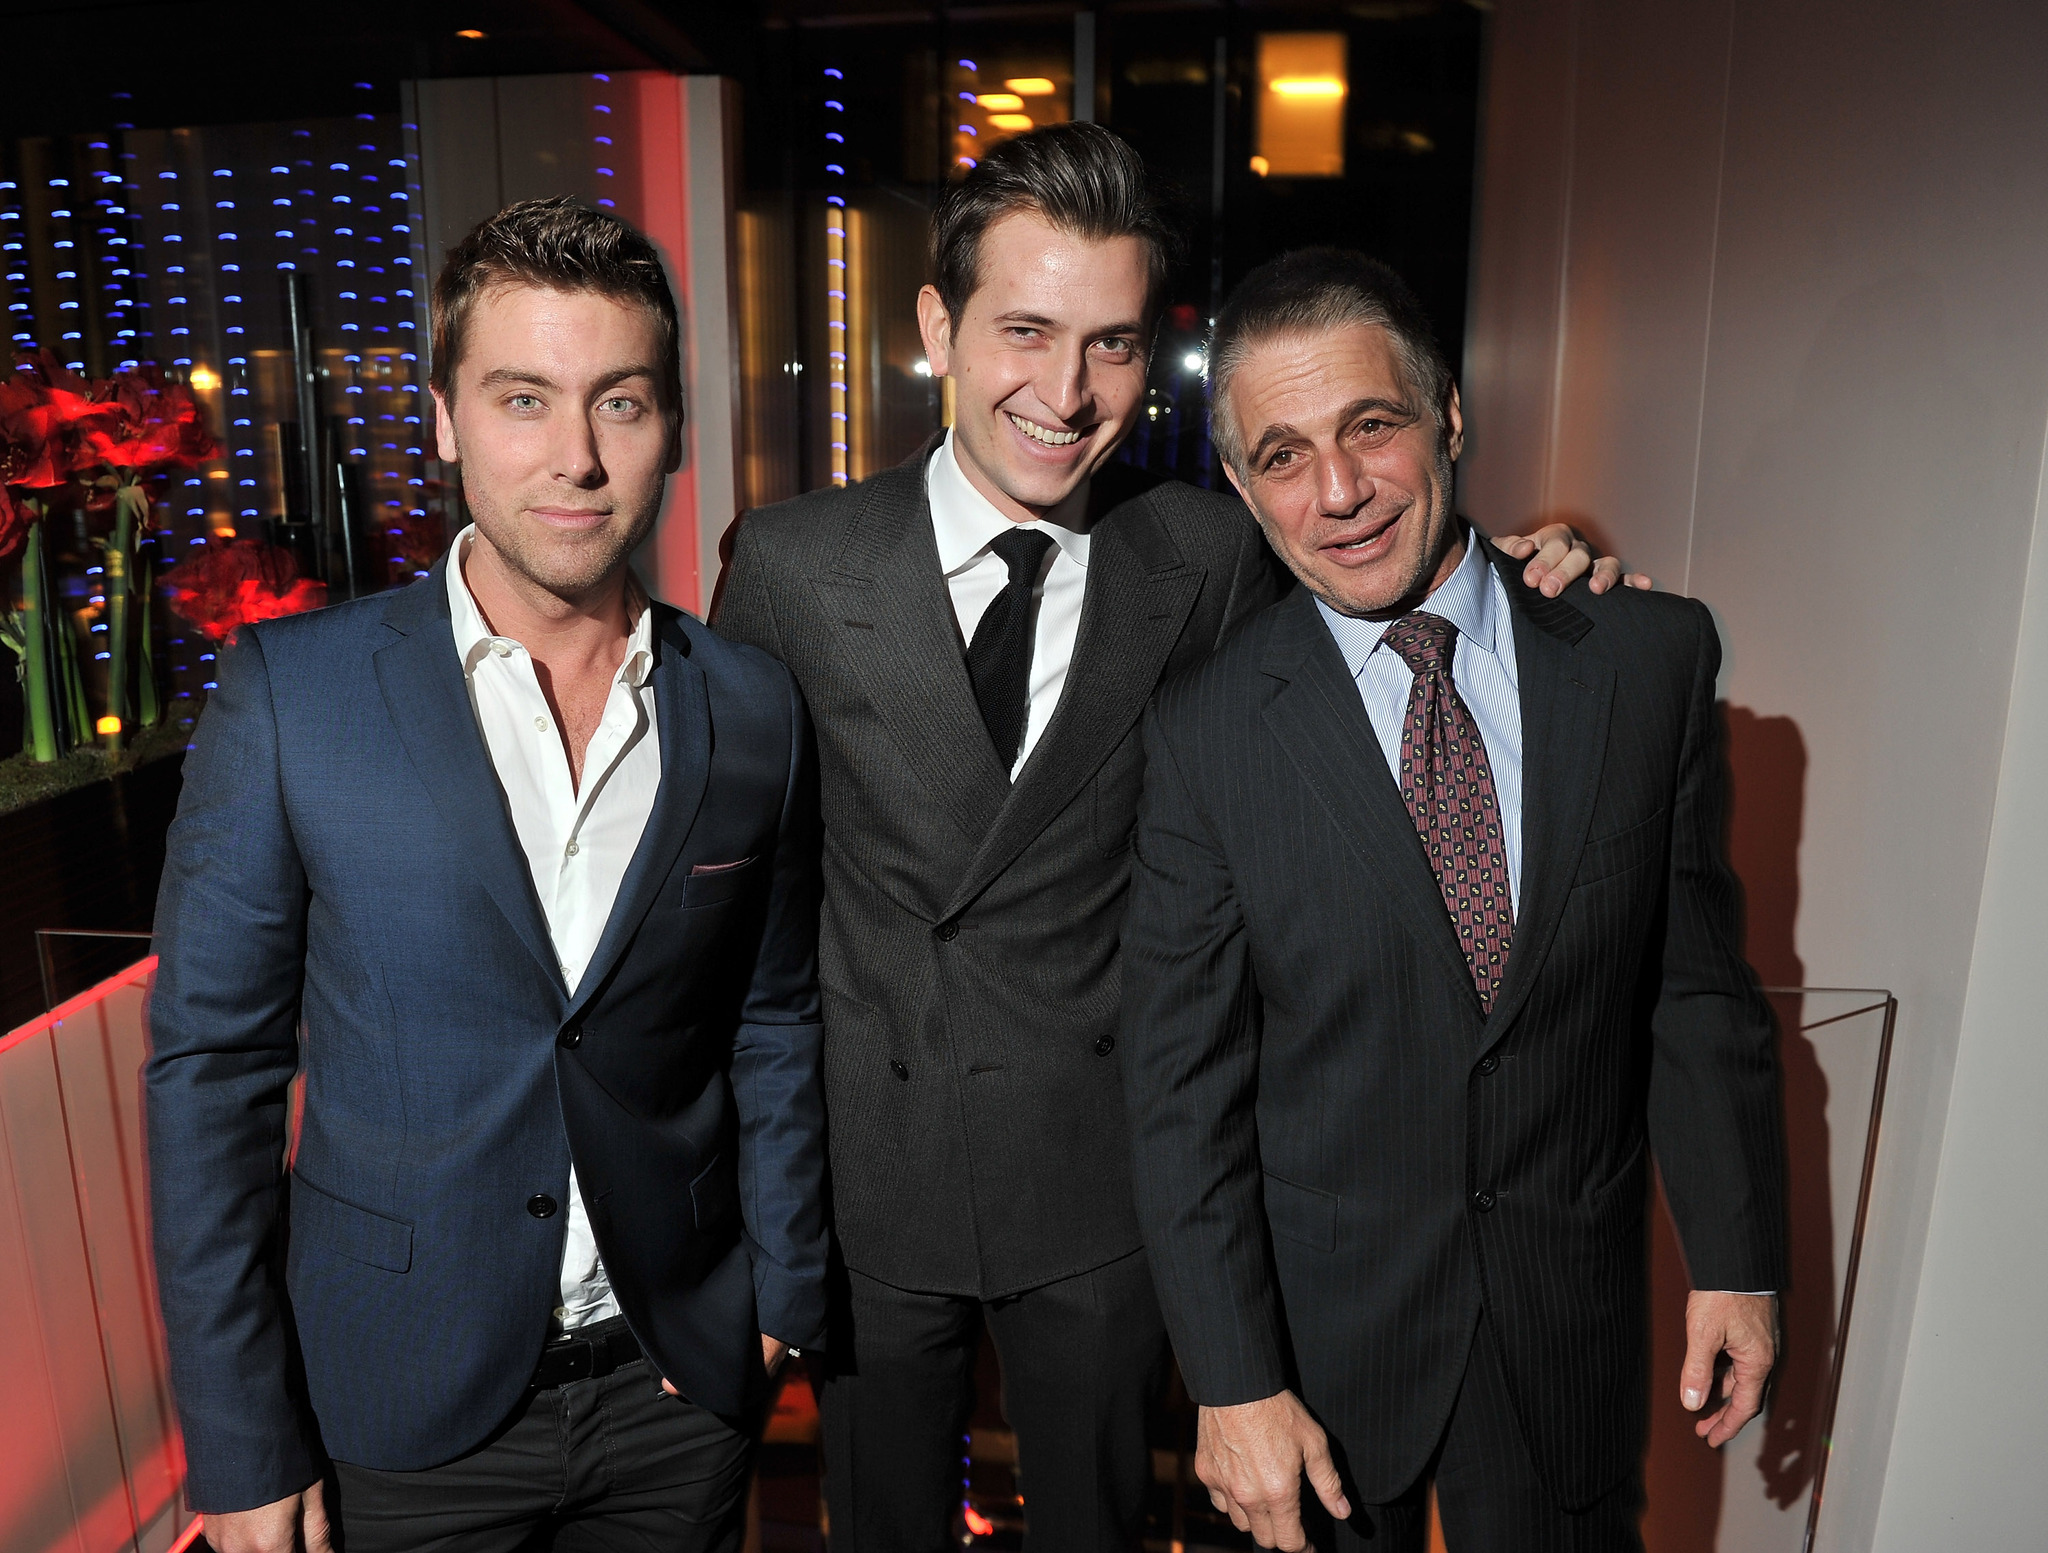 Tony Danza, Lance Bass and Peter Cincotti at event of Albert Nobbs (2011)